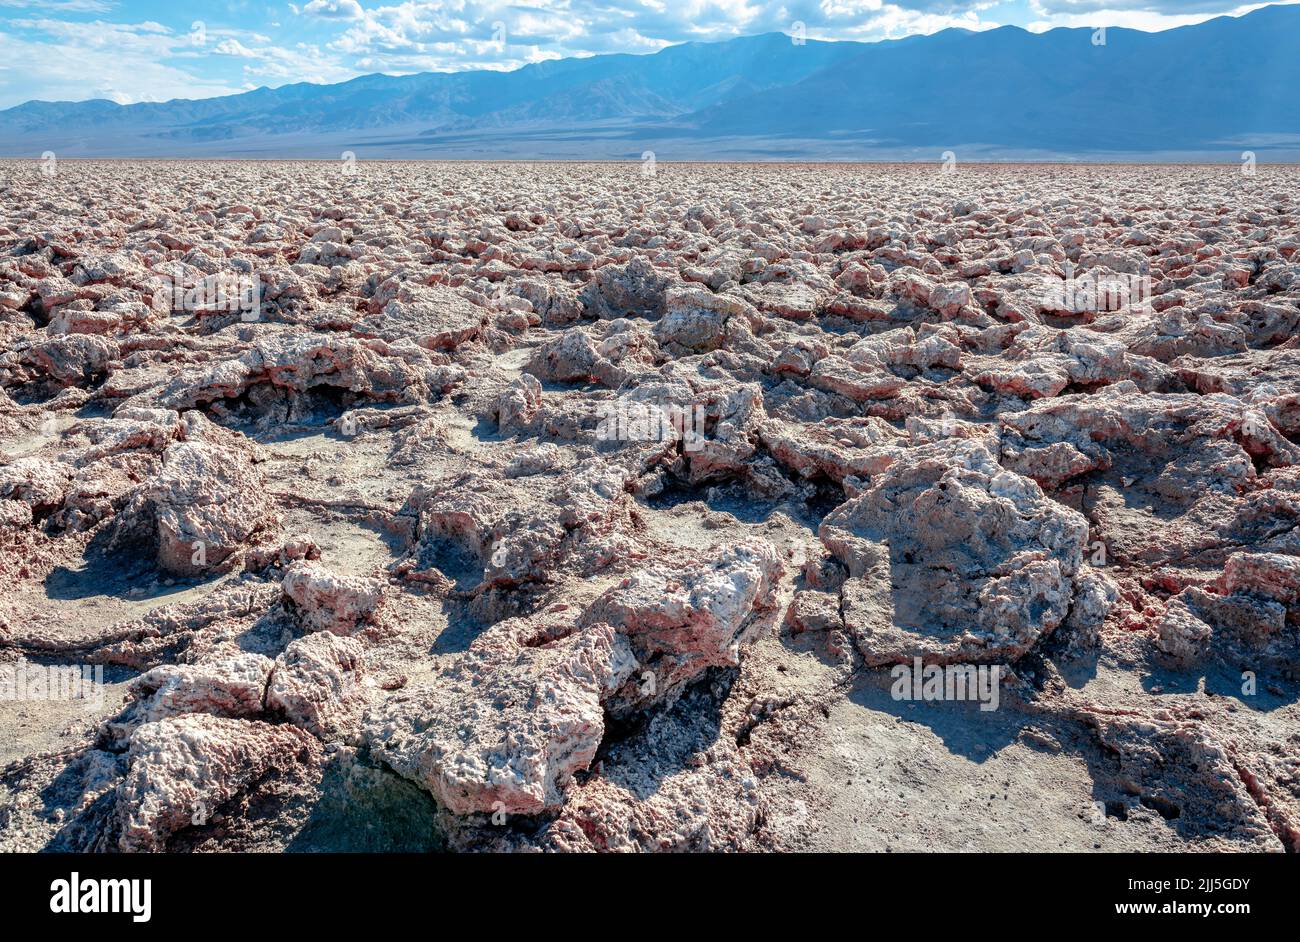 Devil's Golf Course, a large salt pan on the floor of Death Valley National Park, California, USA. Stock Photo